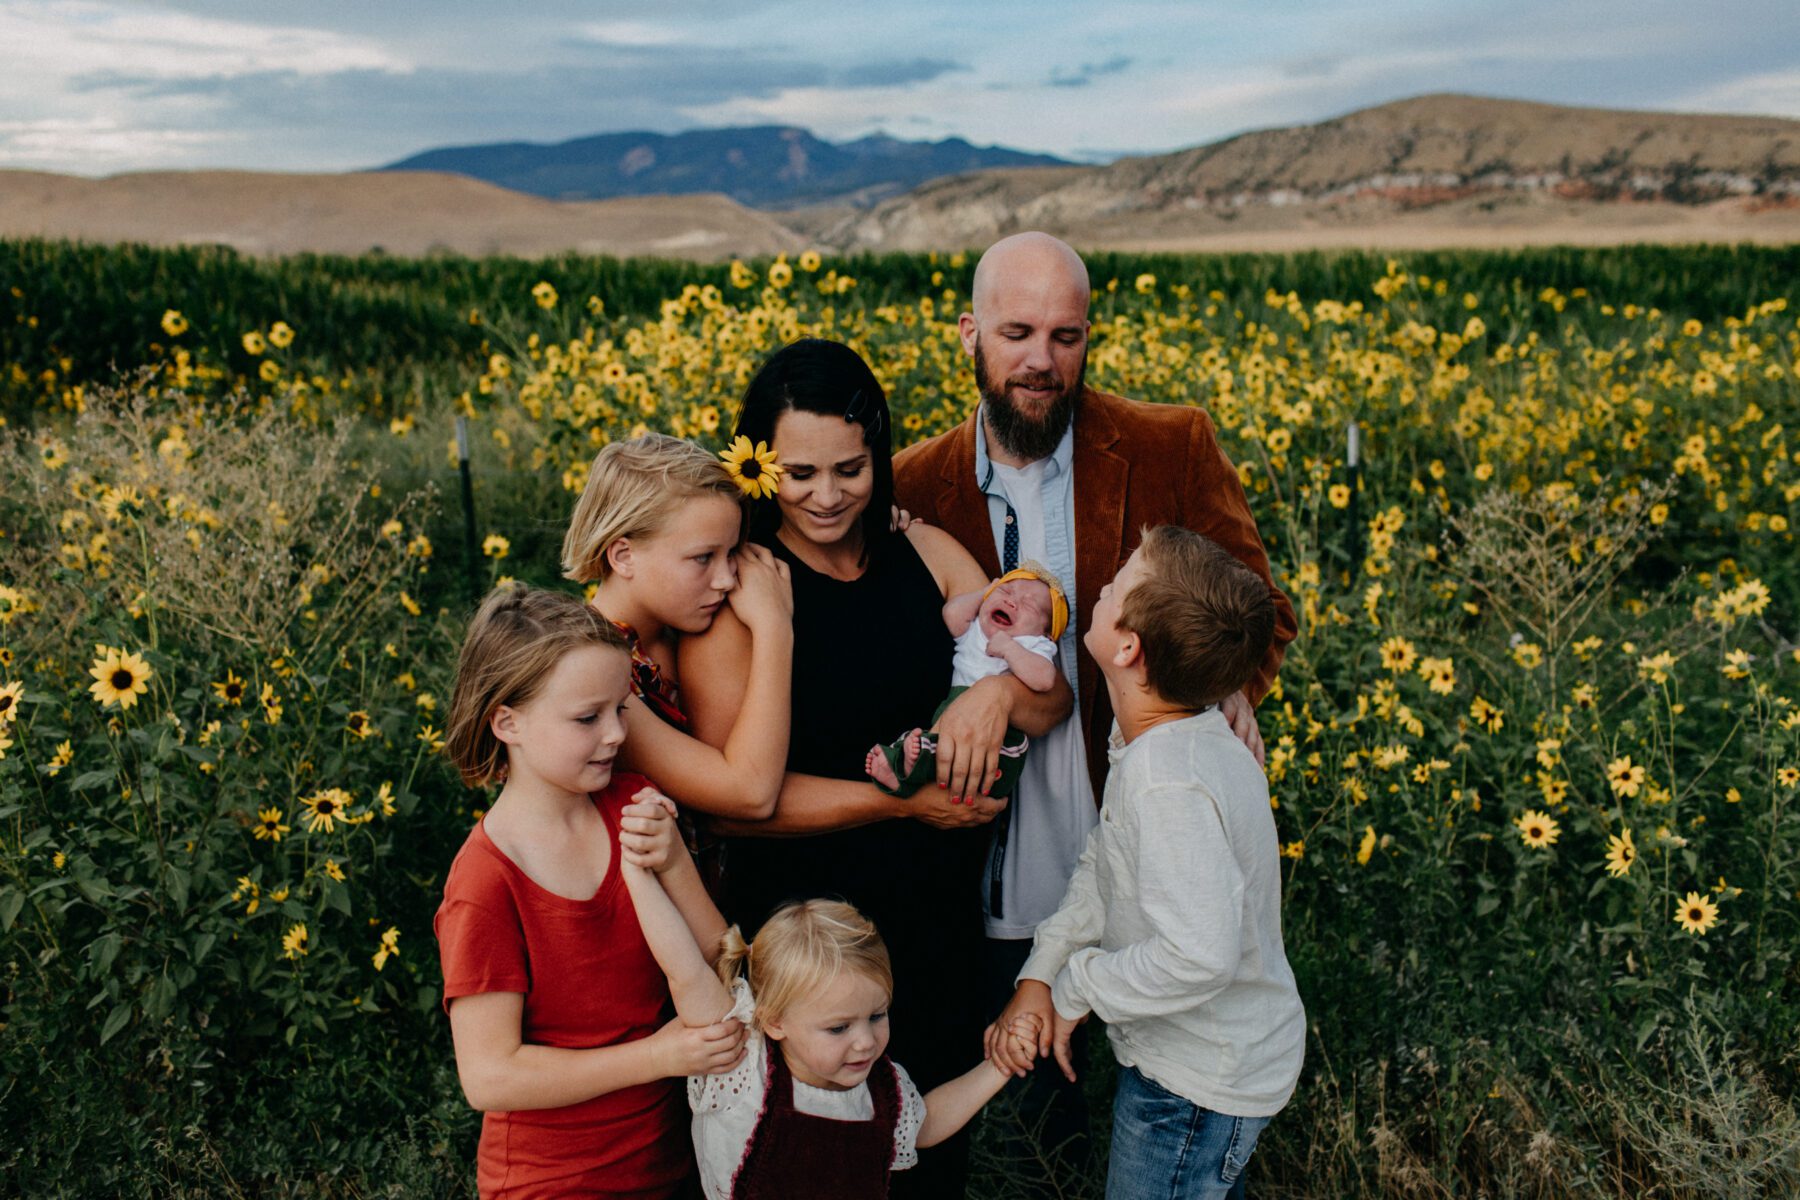 Central, Pa and NEPA family photographer, utah family photographer, bloomsburg family photographer, sanpete county family photographer, central utah family photographer, danville family photographer, wilkes barre family photographer